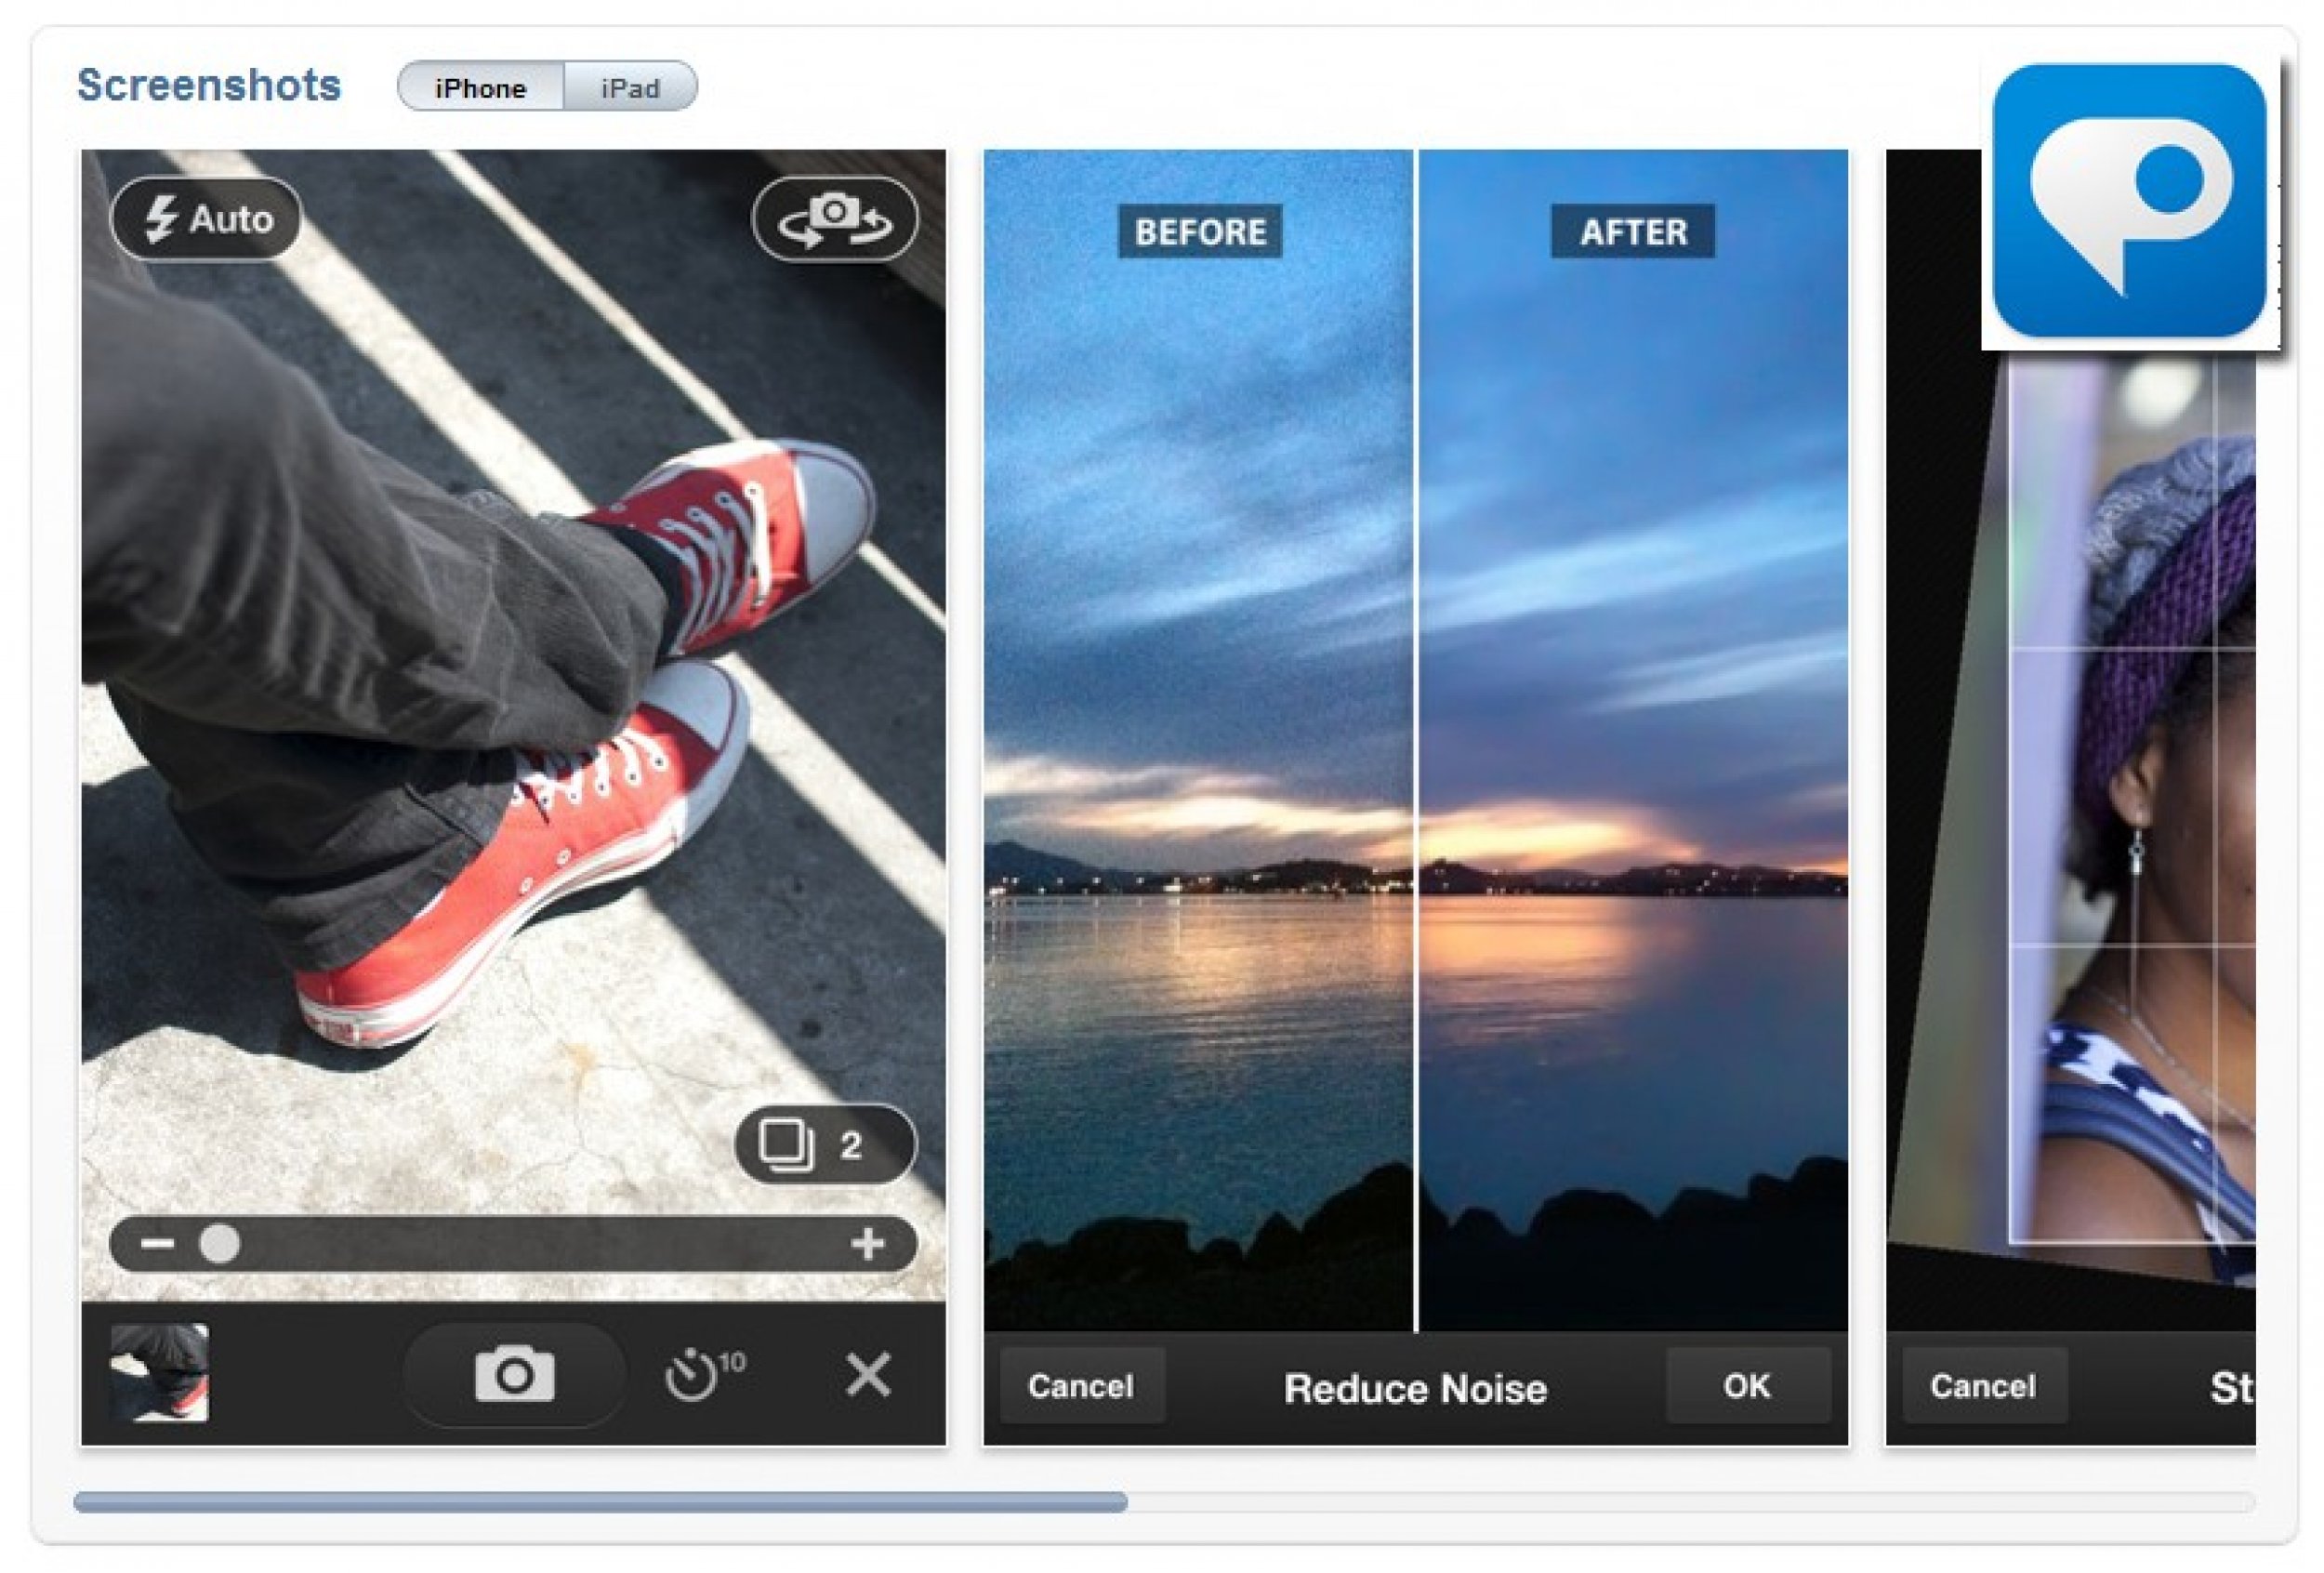 Photoshop Express Photography - Top 50 must-have iPad apps